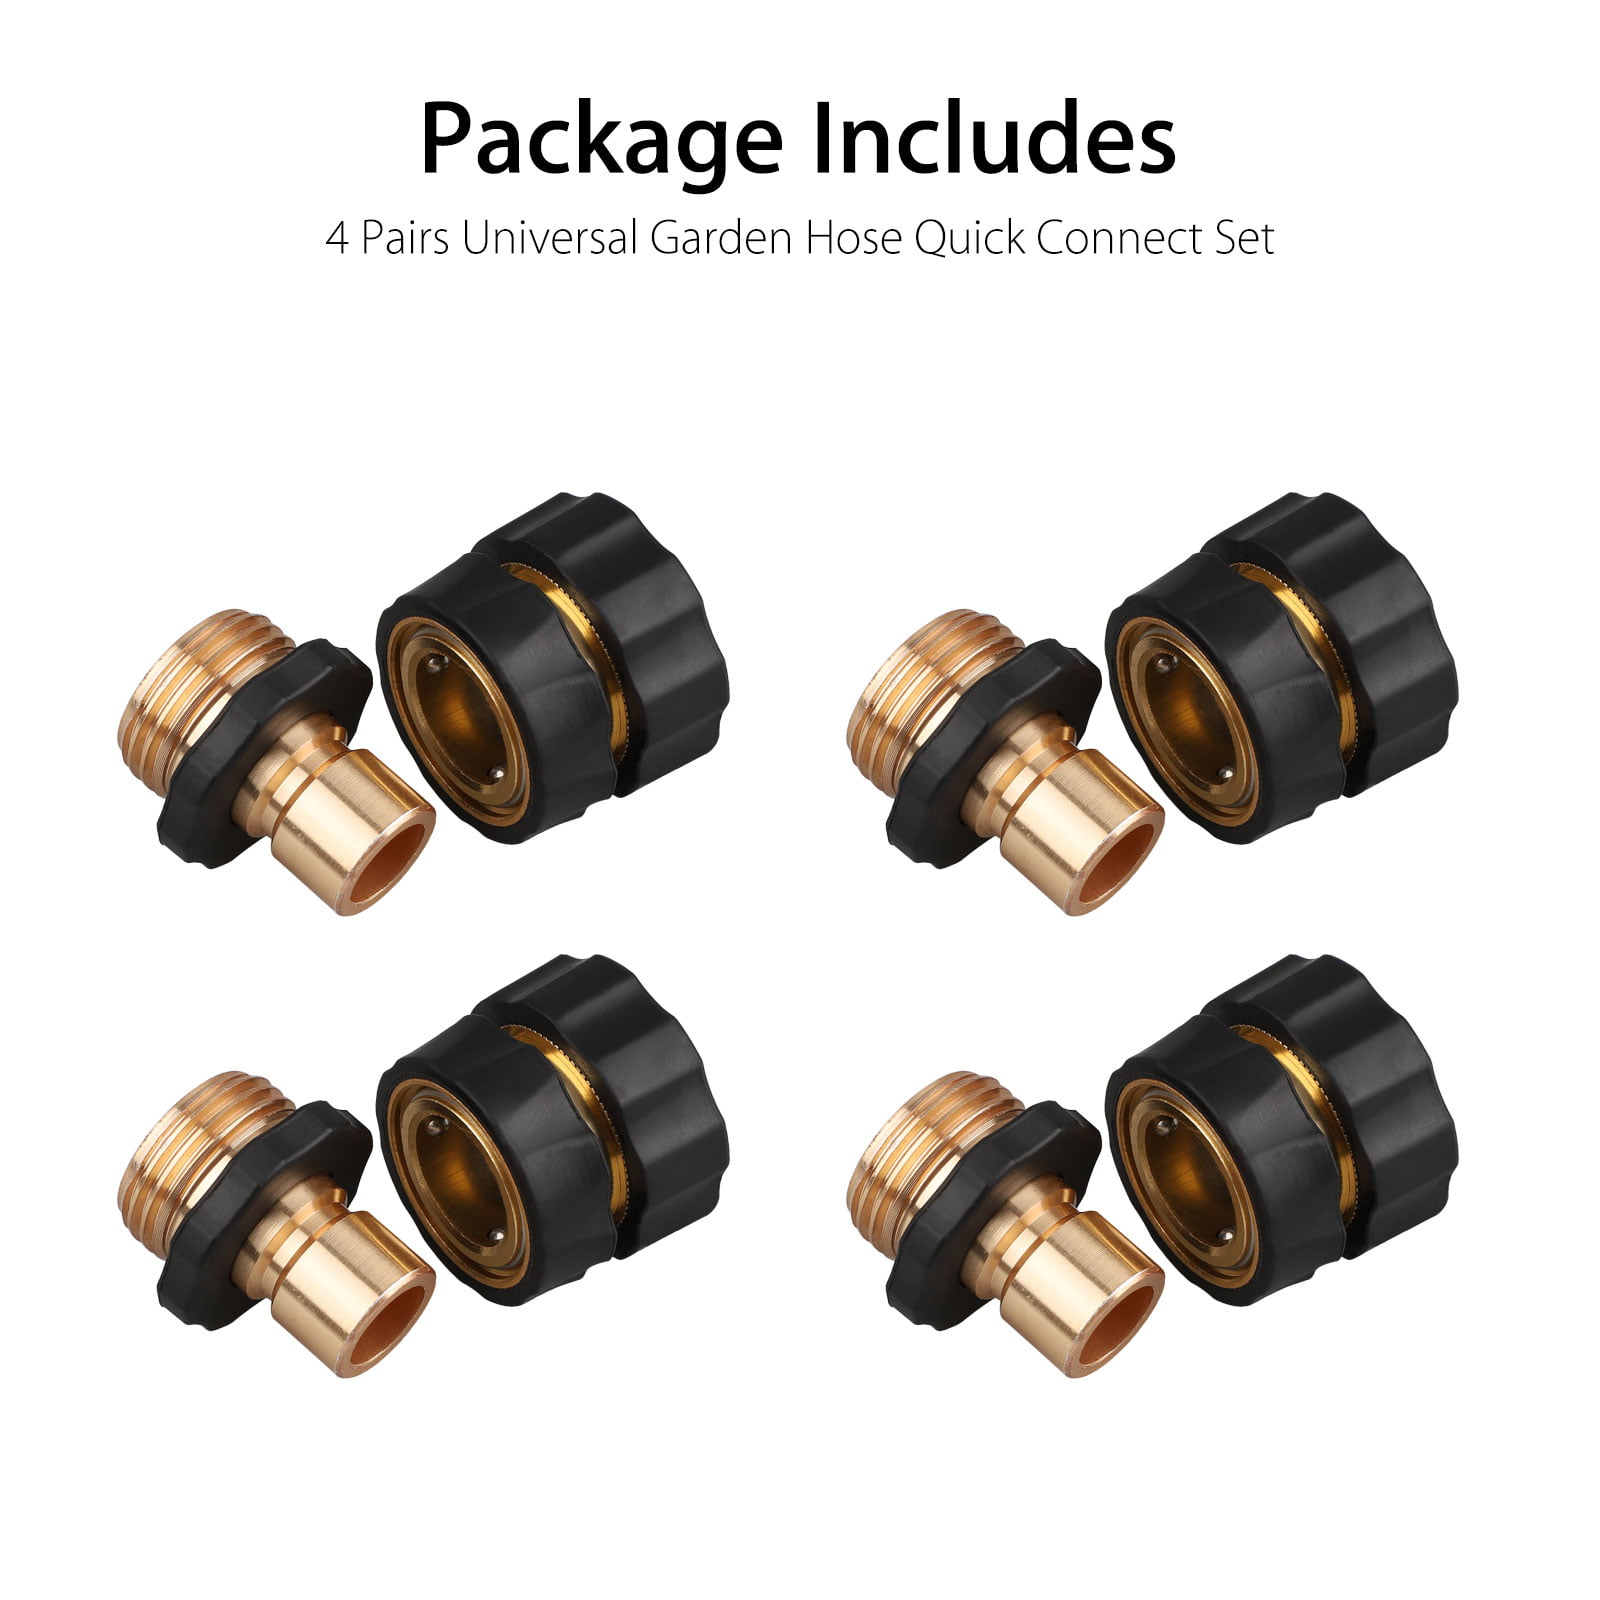 VICSPORT Brass Garden Hose End Connector Fitting Water Hose 3/4 inch Female and Male Quick Connector Adapter